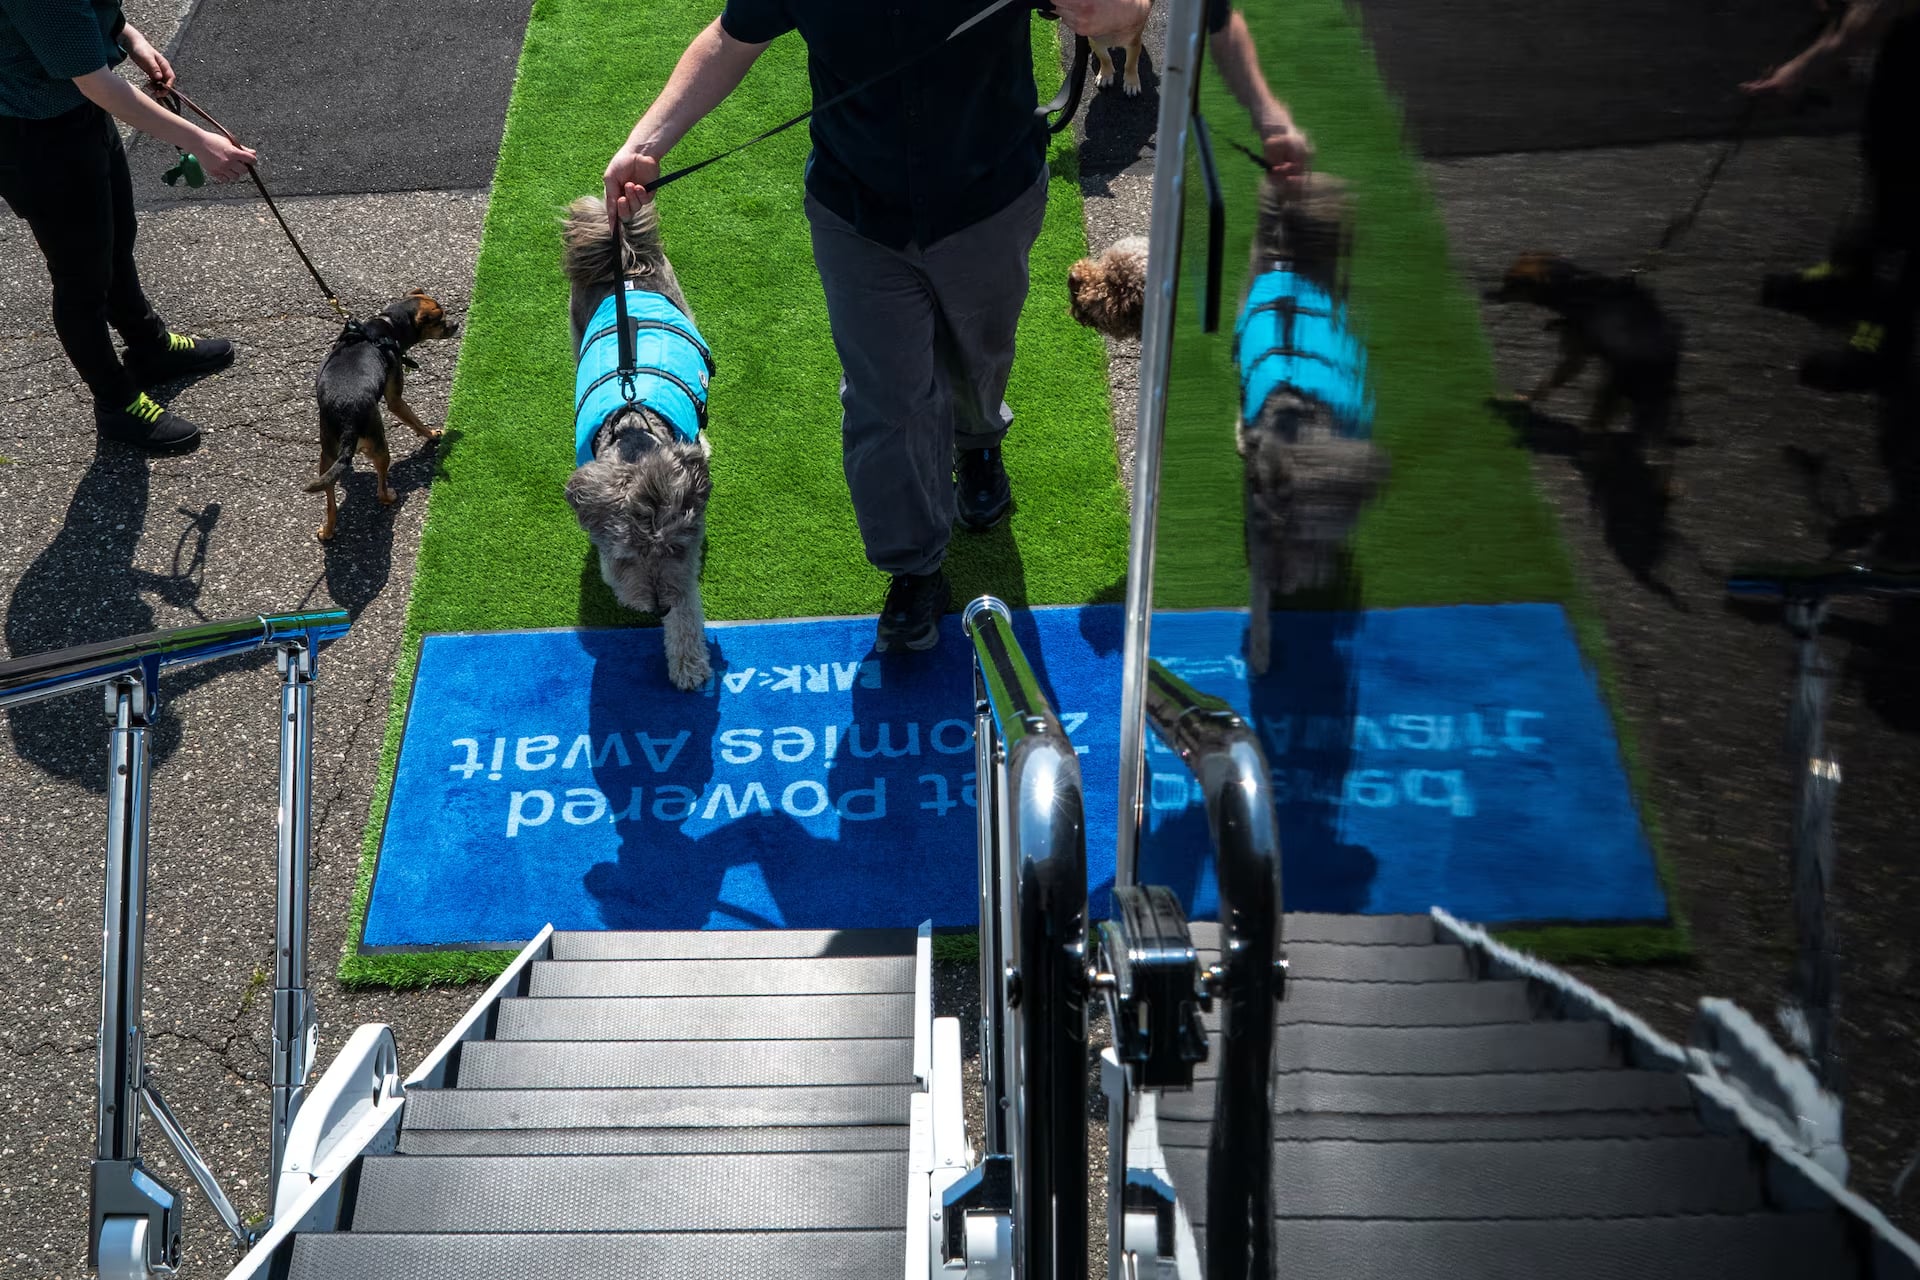 Dogs and handlers board a plane during a press event introducing Bark Air, an airline for dogs, at Republic Airport in East Farmingdale, New York, May 21. Photo: Reuters